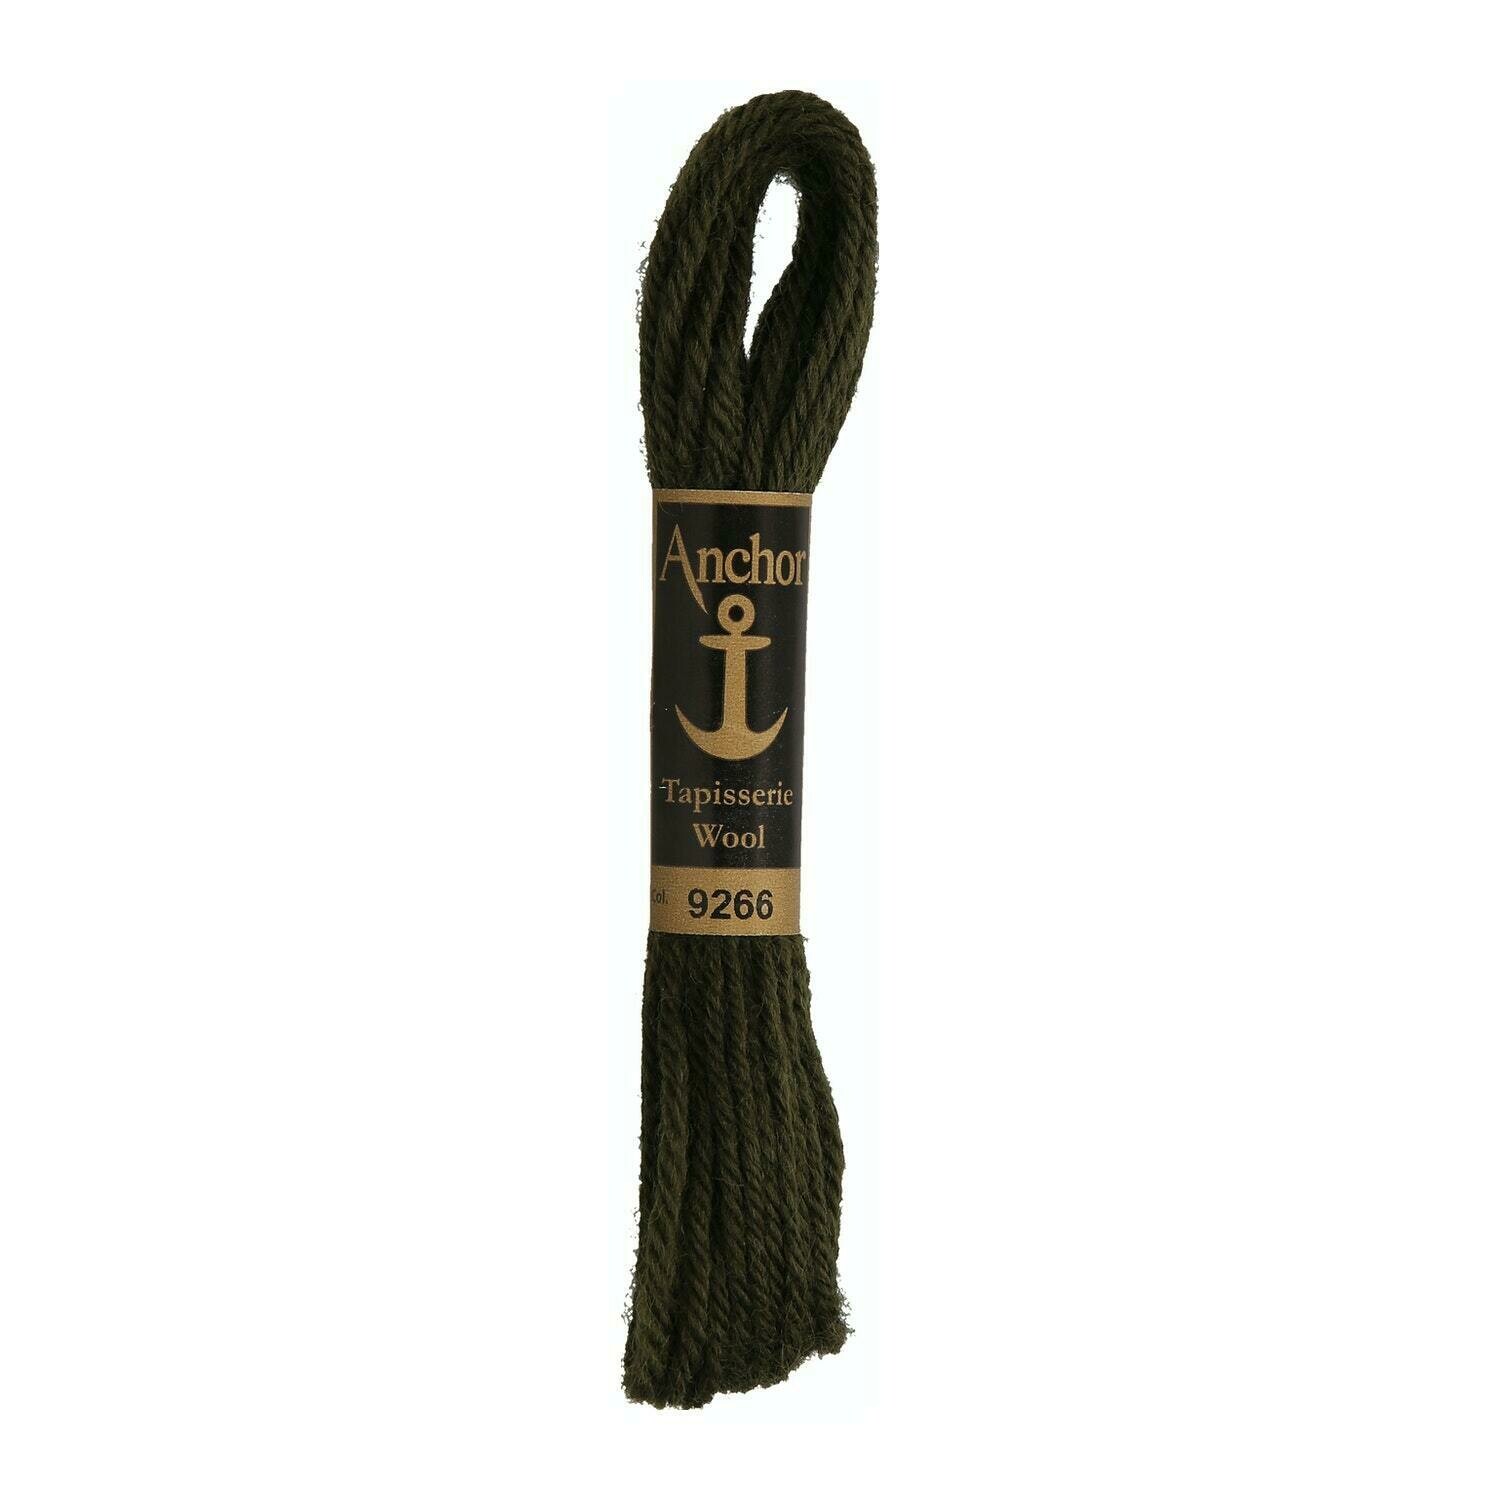 Anchor Tapisserie Wool #09266